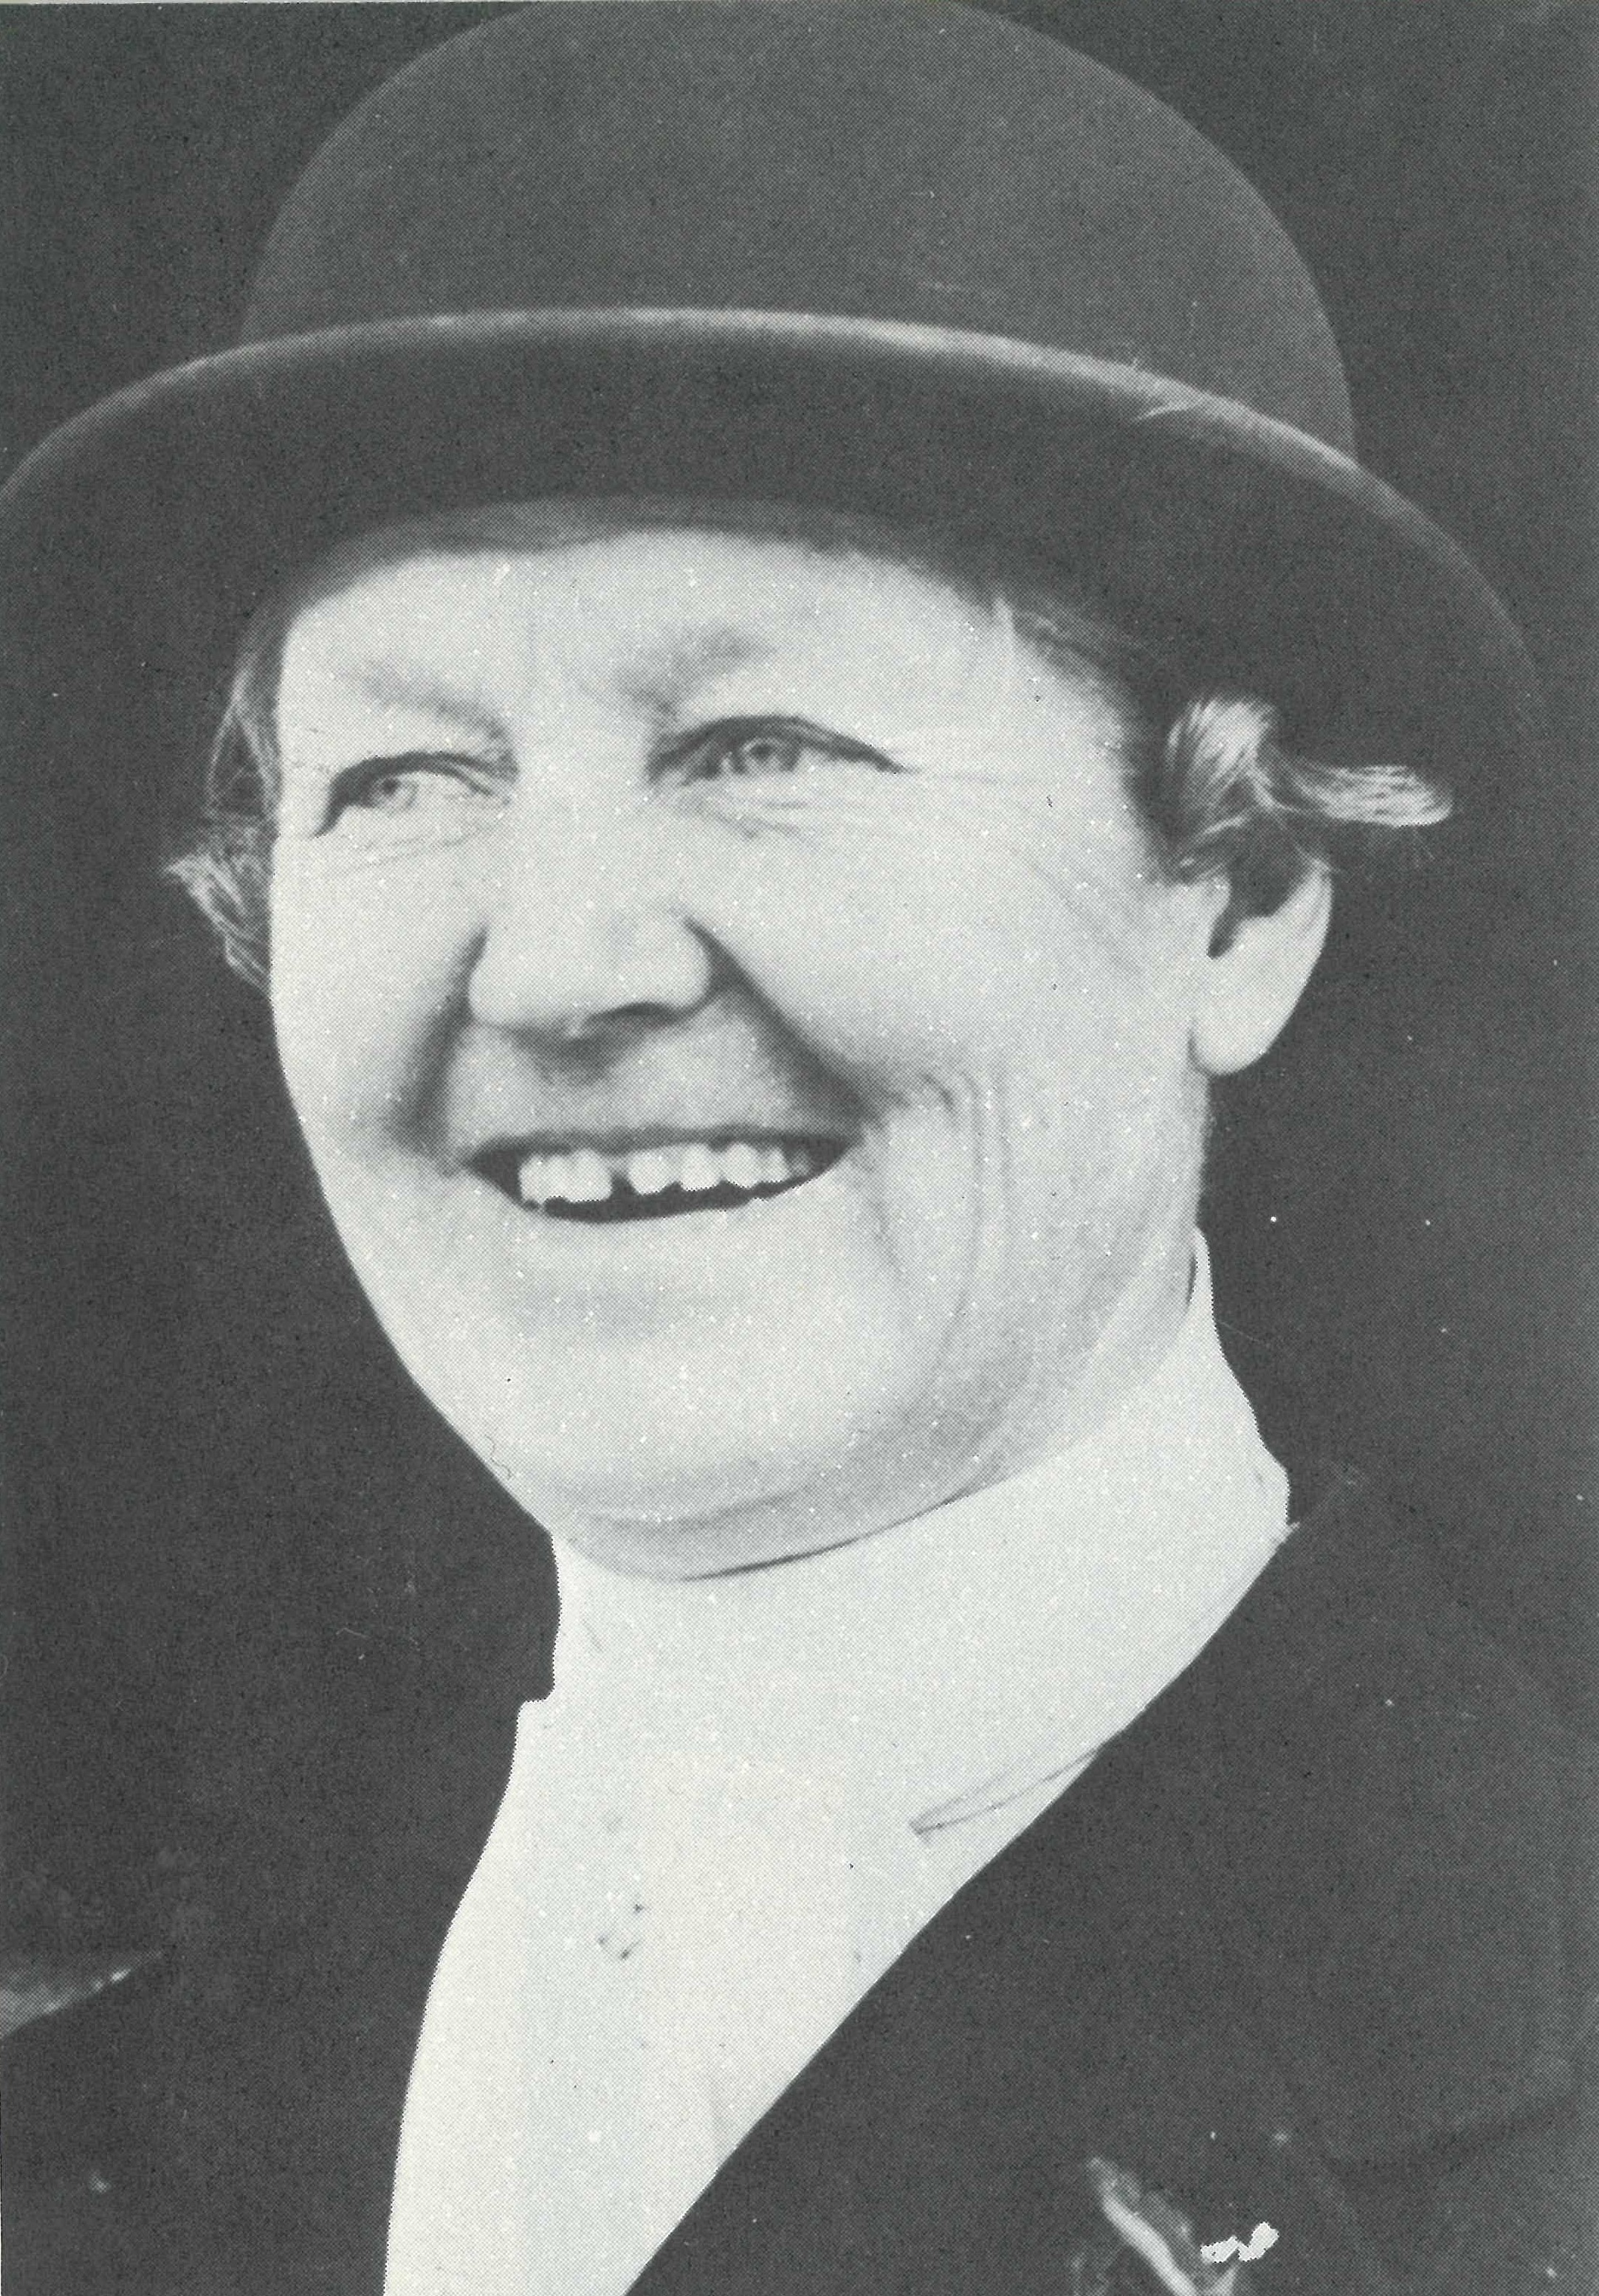 Eileen Coffey after winning her friend's award in 1937. Image courtesy of The Garryowen Trophy published by The Studmaster Press.